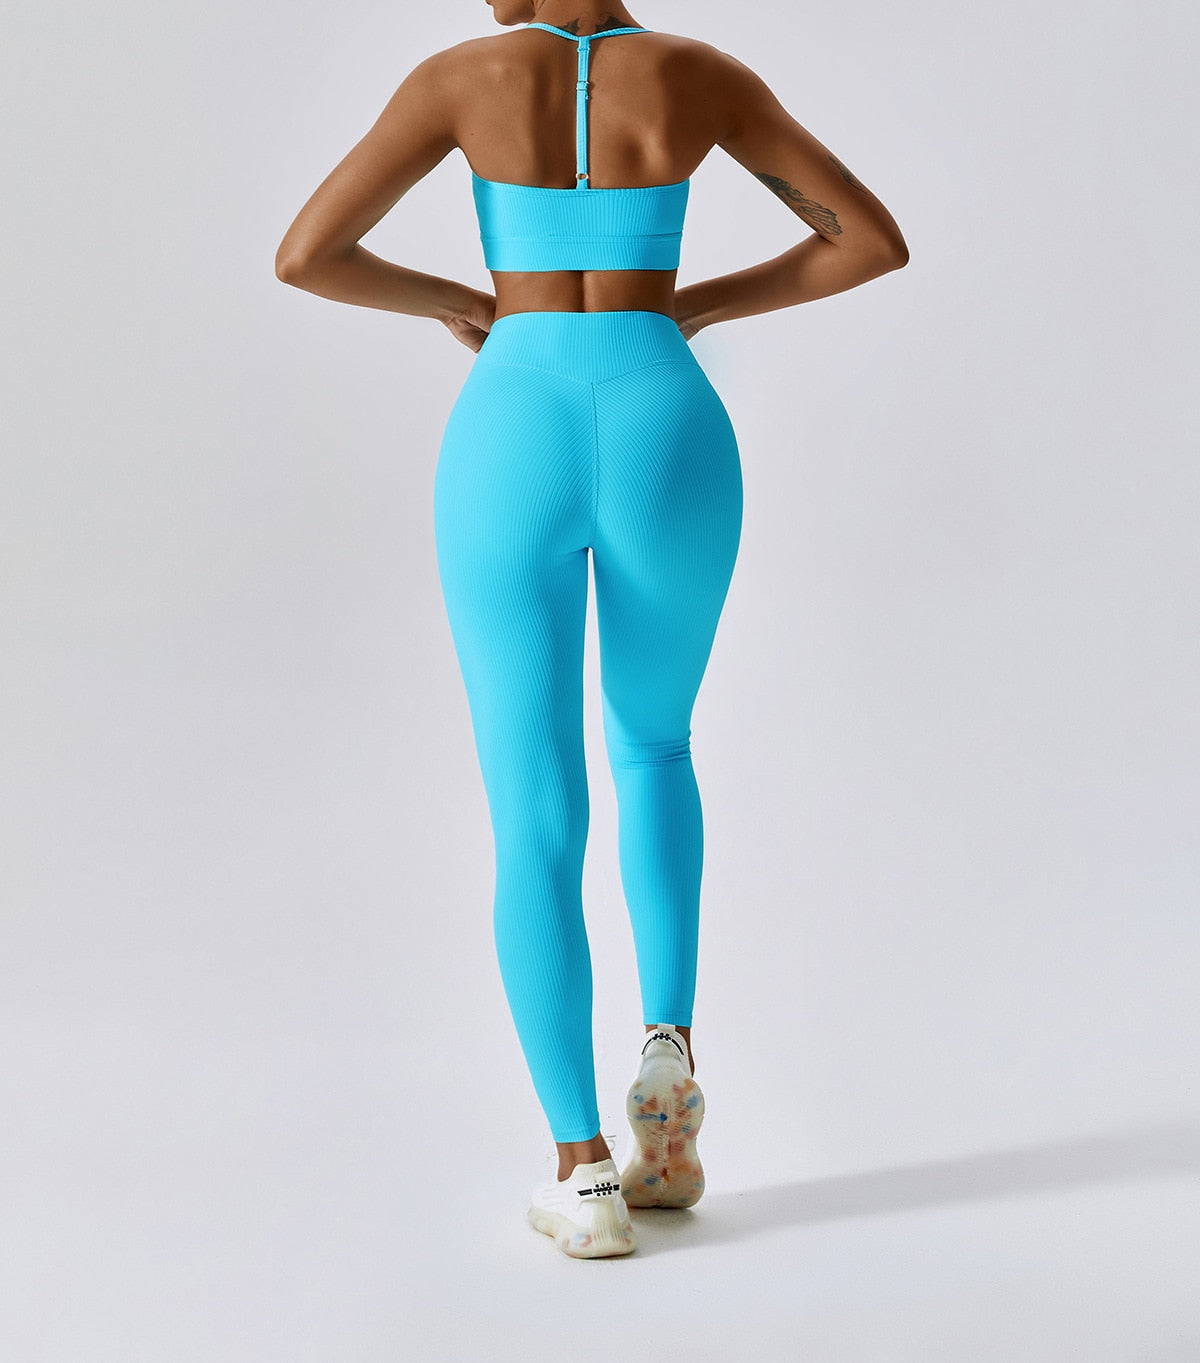 Ribbed Yoga Set Sportswear Women Suit For Fitness Clothing Sports Suit Workout Clothes Tracksuit Sports Outfit Gym Clothing Wear   71.99 EZYSELLA SHOP